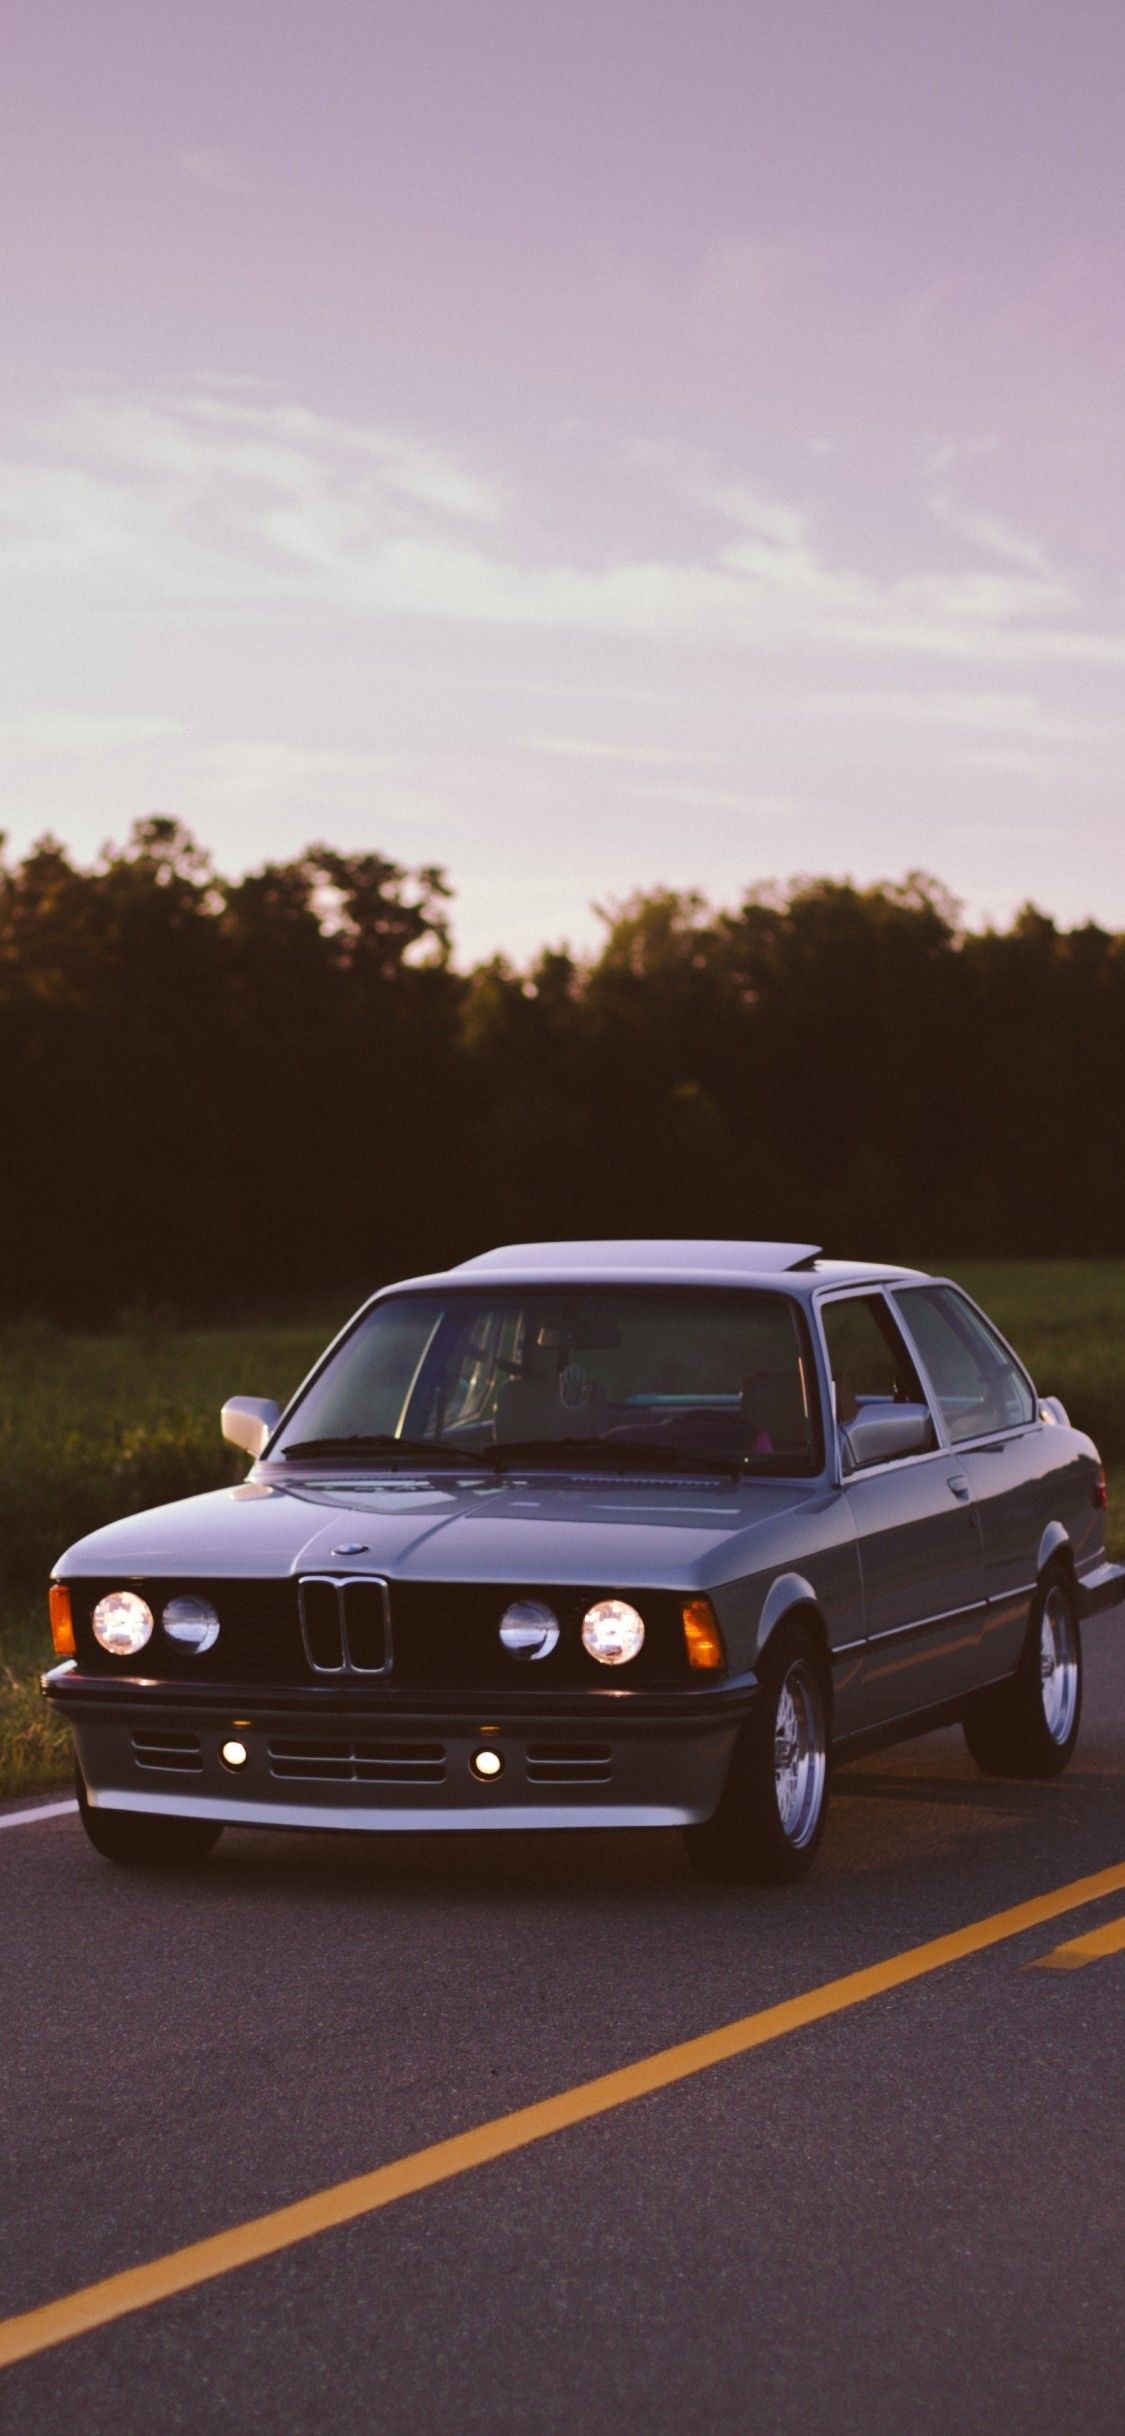 Download 1125x2436 Bmw, Old Cars, Trees, Evening Wallpaper